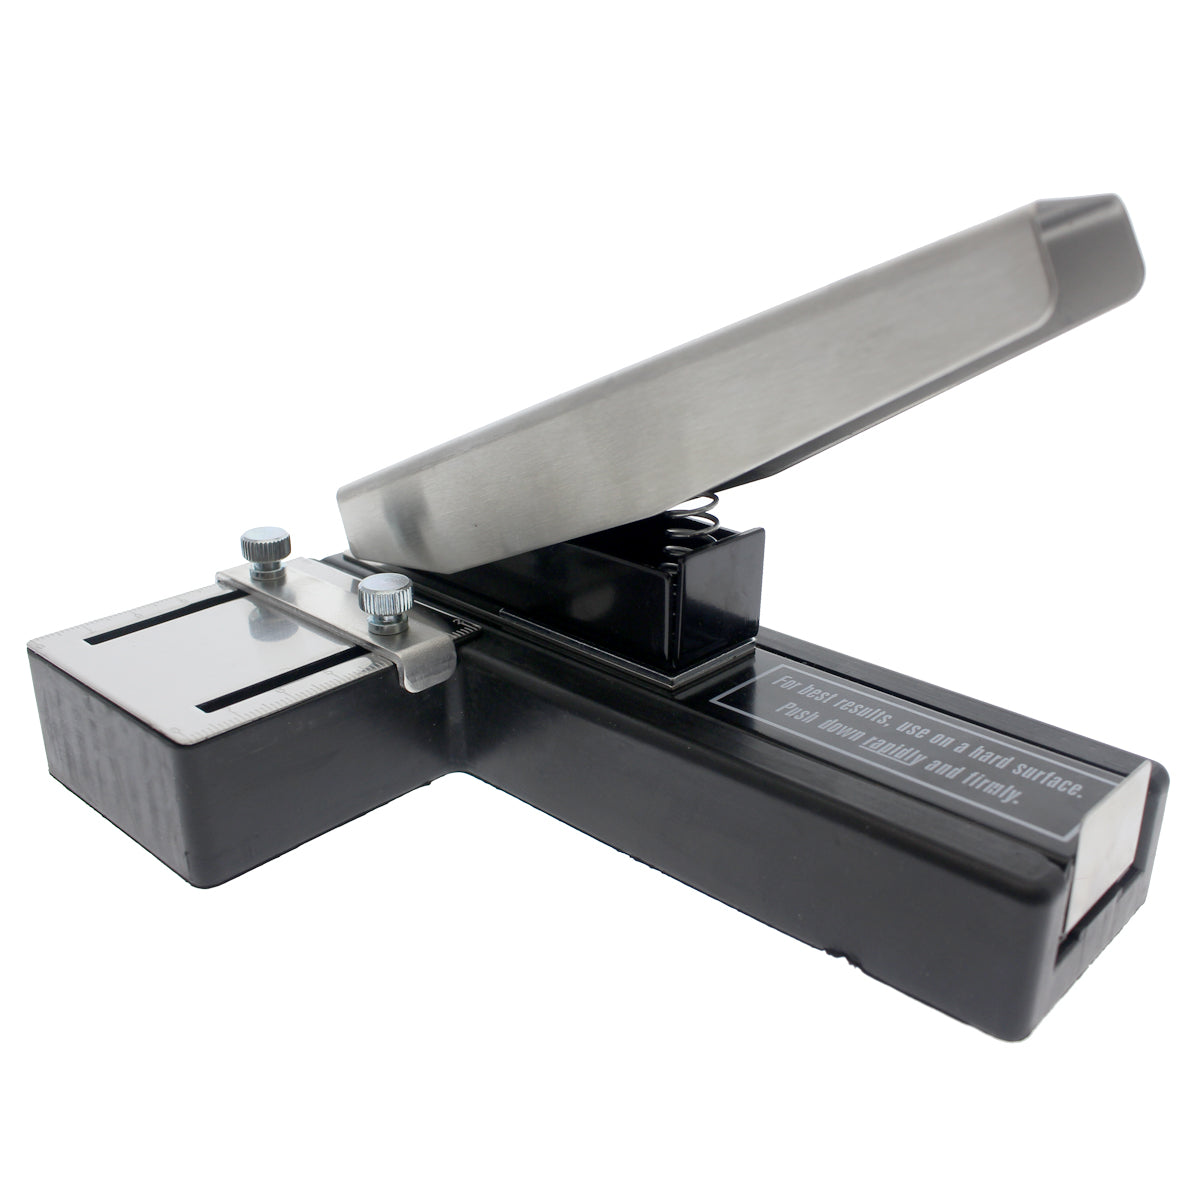 Stapler-Style Slot Punch With Adjustable Guide (P/N SPID-9750) SPID-9750